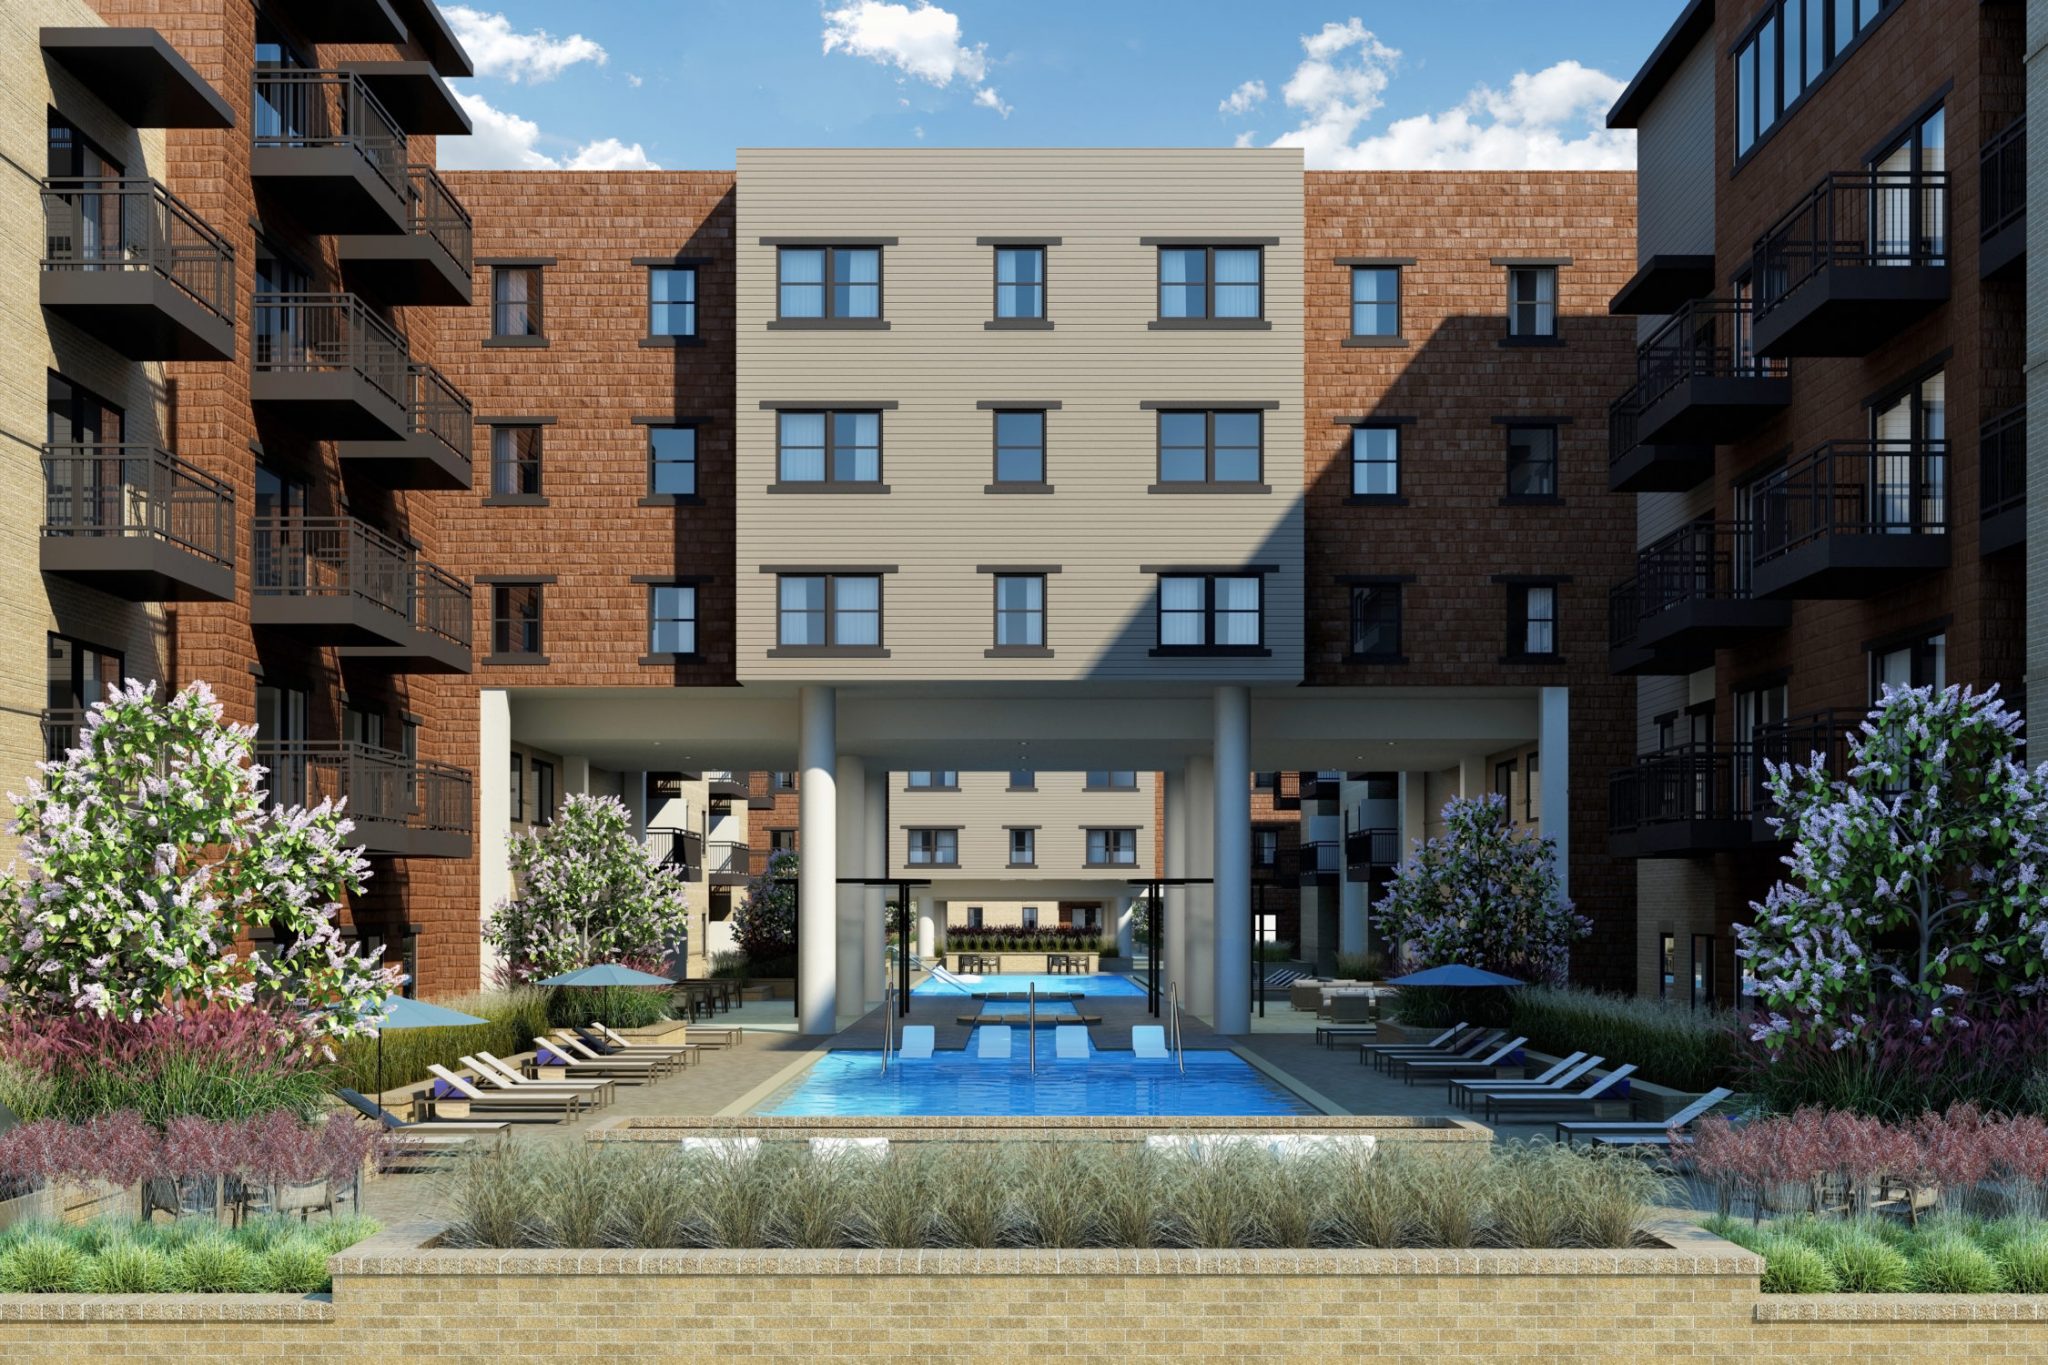 5 Brand New Dallas Apartments Opening In Late Summer 2019 | Smart City